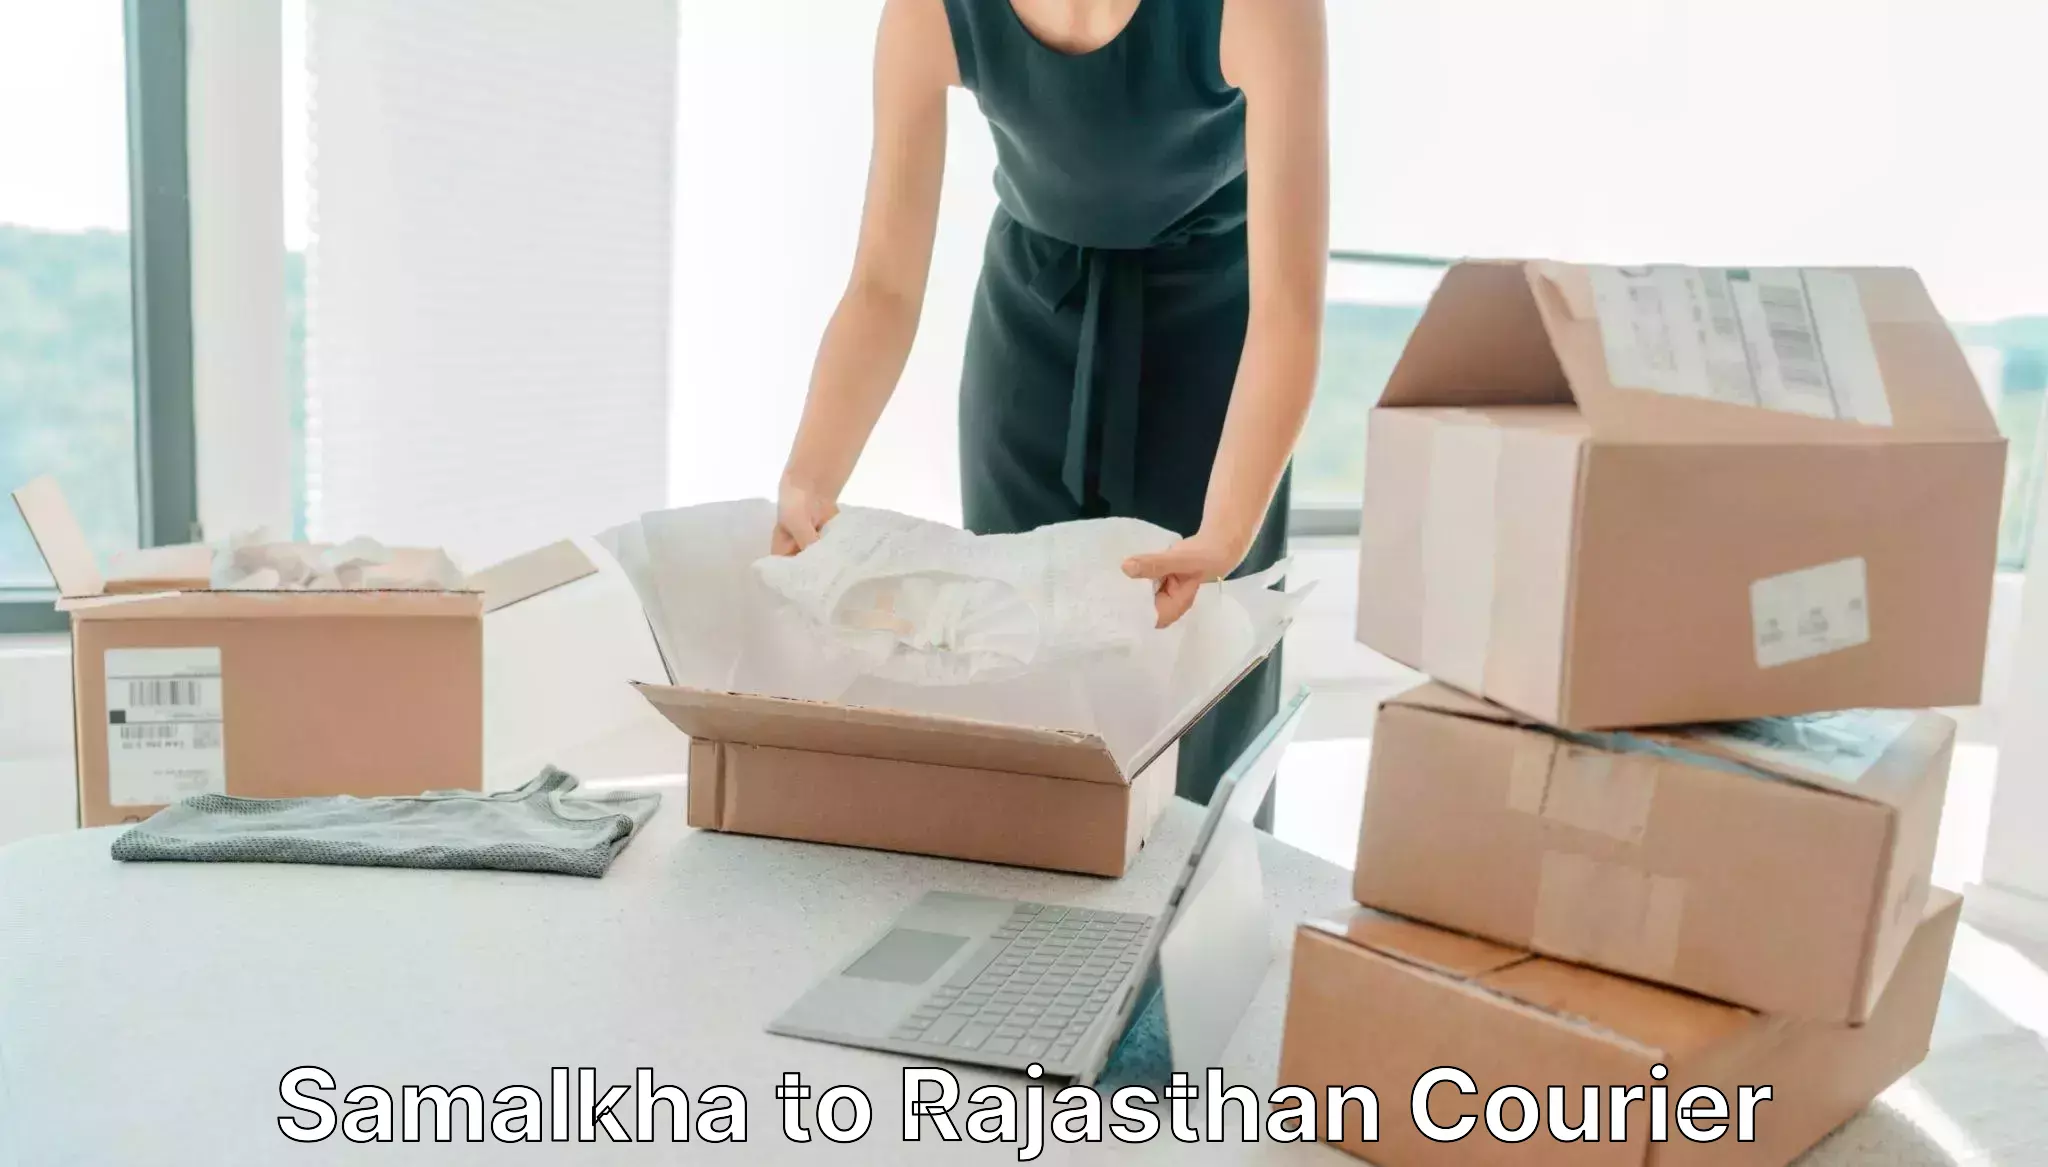 Lightweight parcel options Samalkha to Piparcity